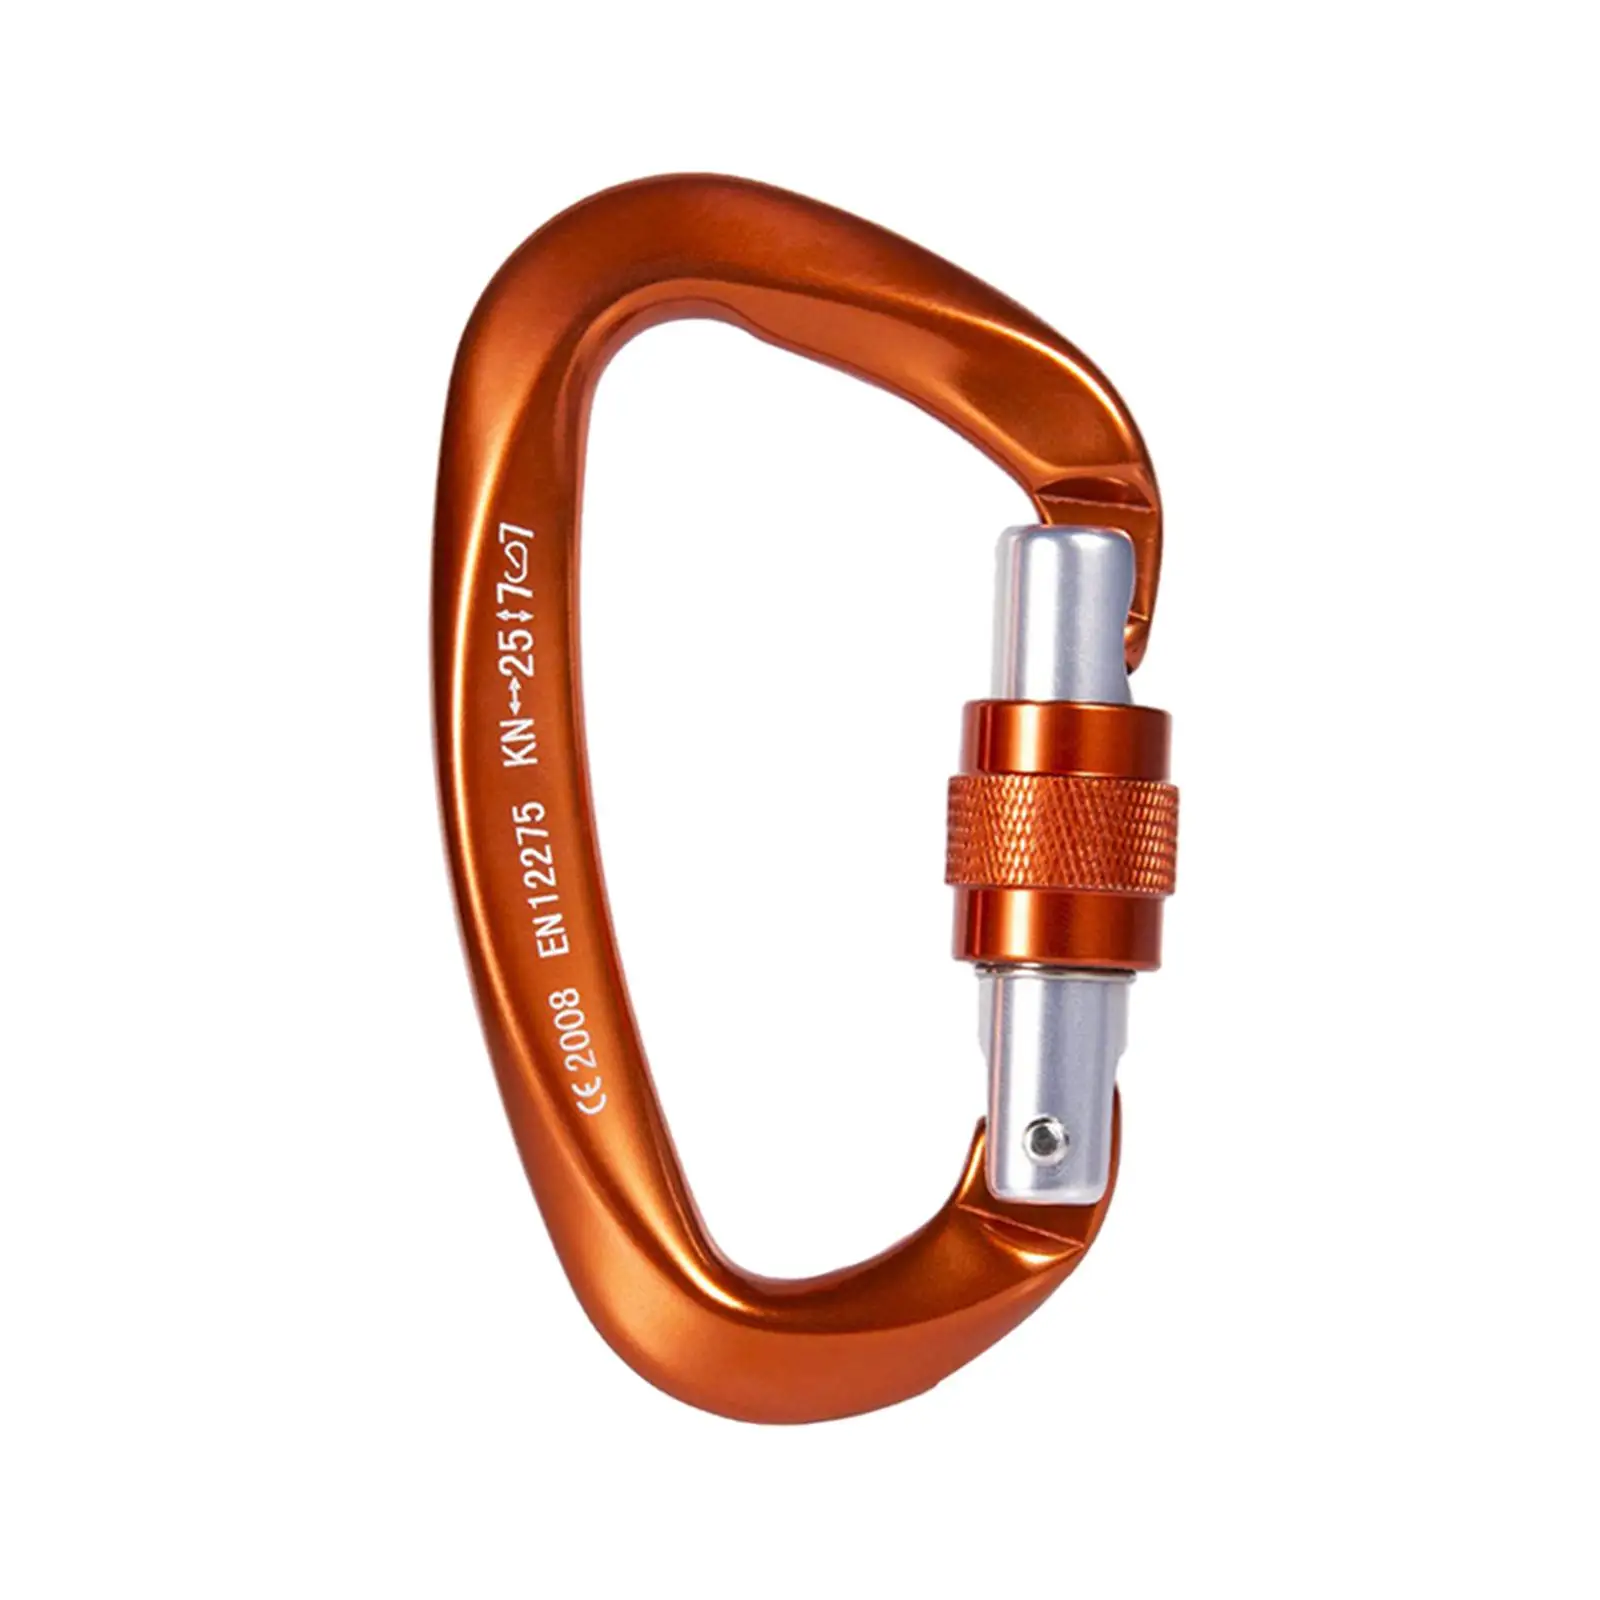 Key Chain Carabiner Keyring D Shaped Carabiner for Caving Rappelling Outdoor